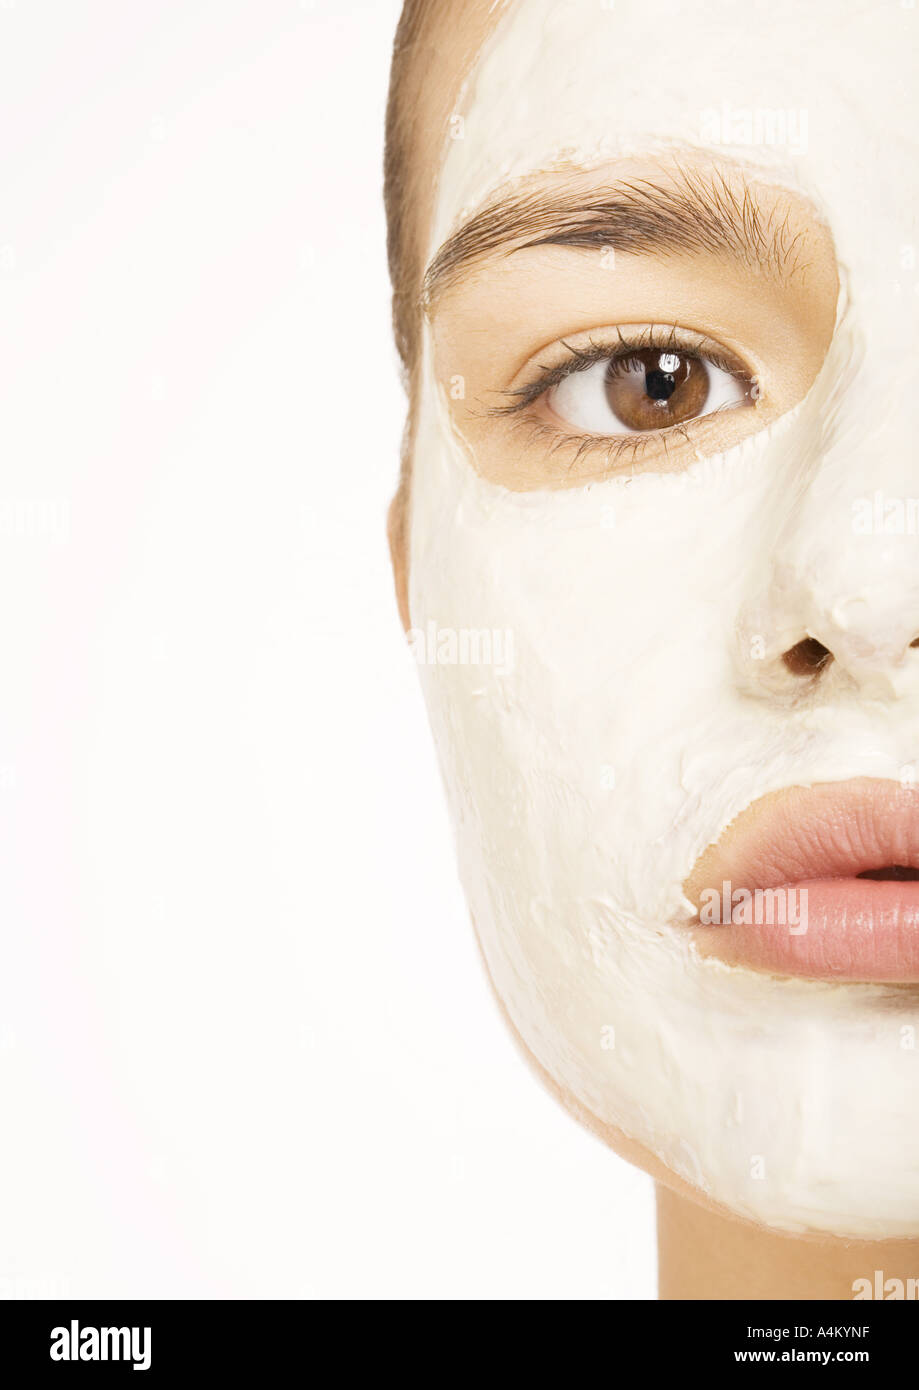 Woman with facial mask, extreme close-up Stock Photo